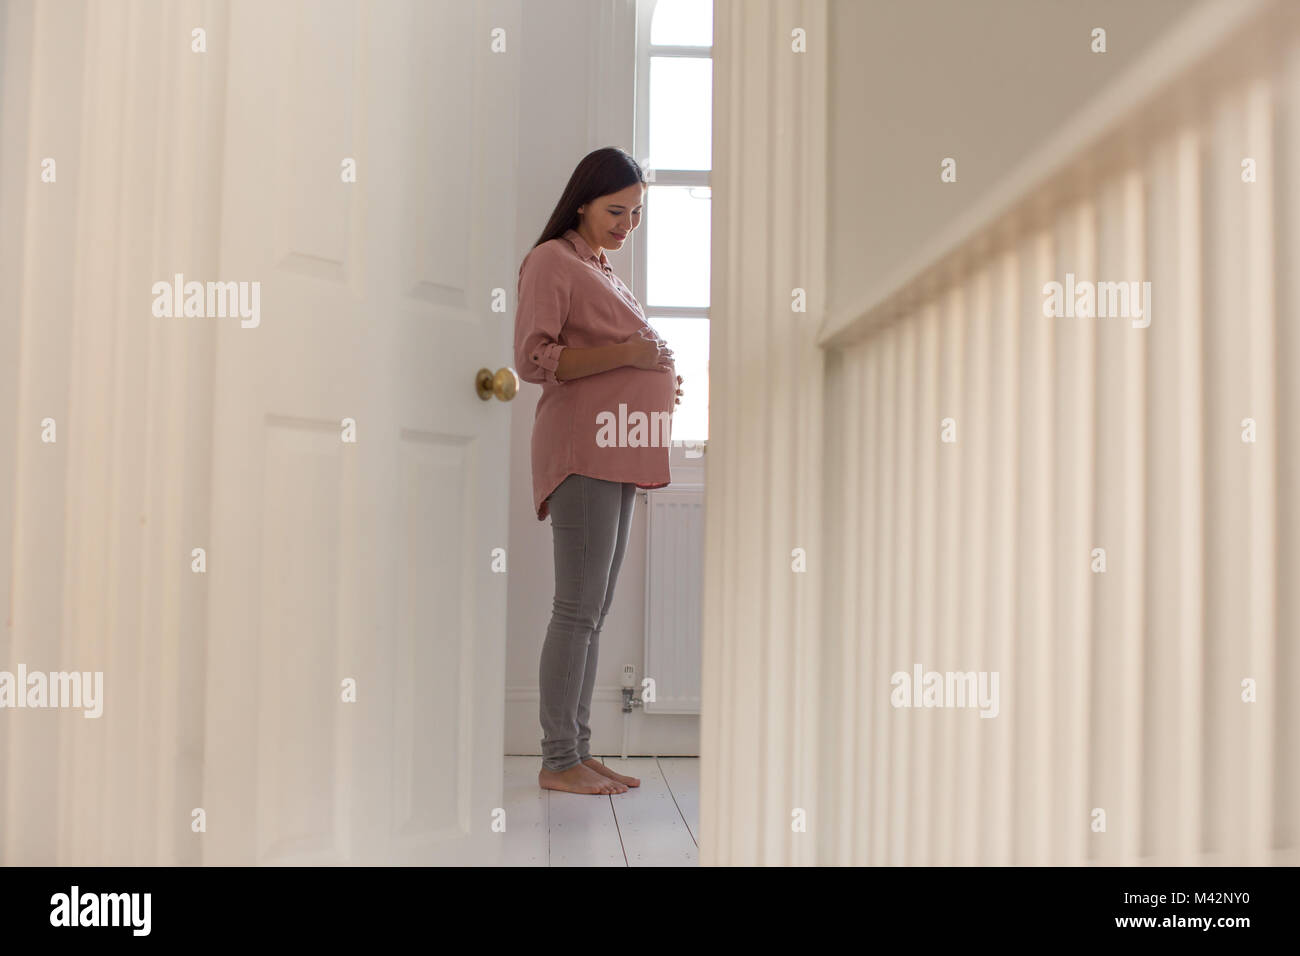 Pregnant woman standing in nursery room Banque D'Images